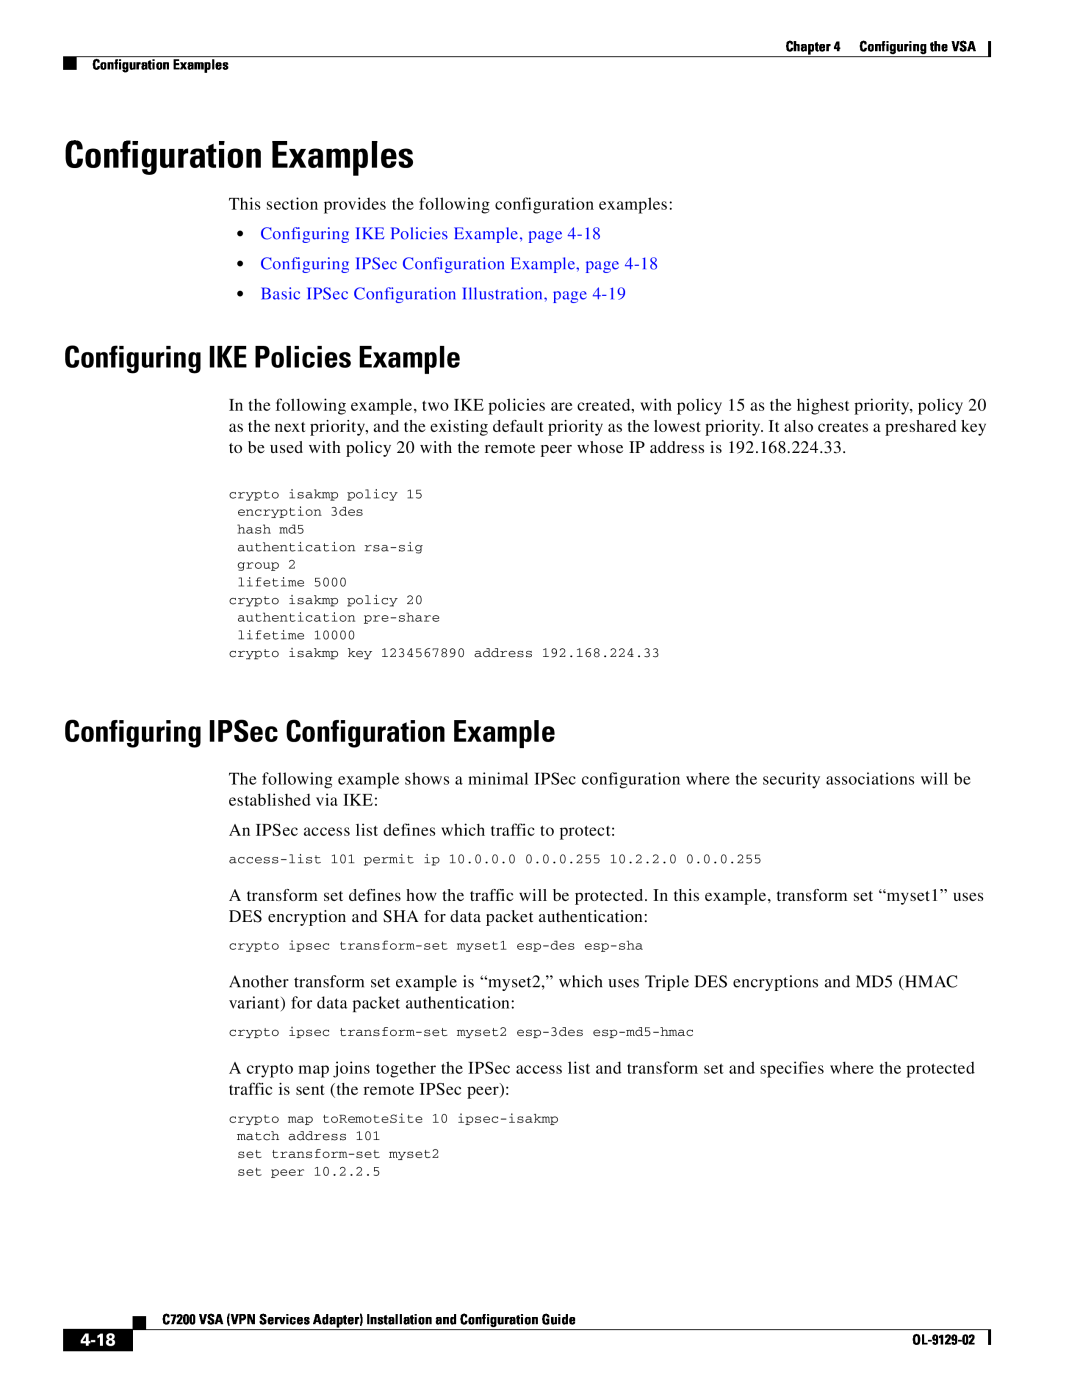 Cisco Systems C7200 Configuration Examples, Configuring IKE Policies Example, Configuring IPSec Configuration Example 